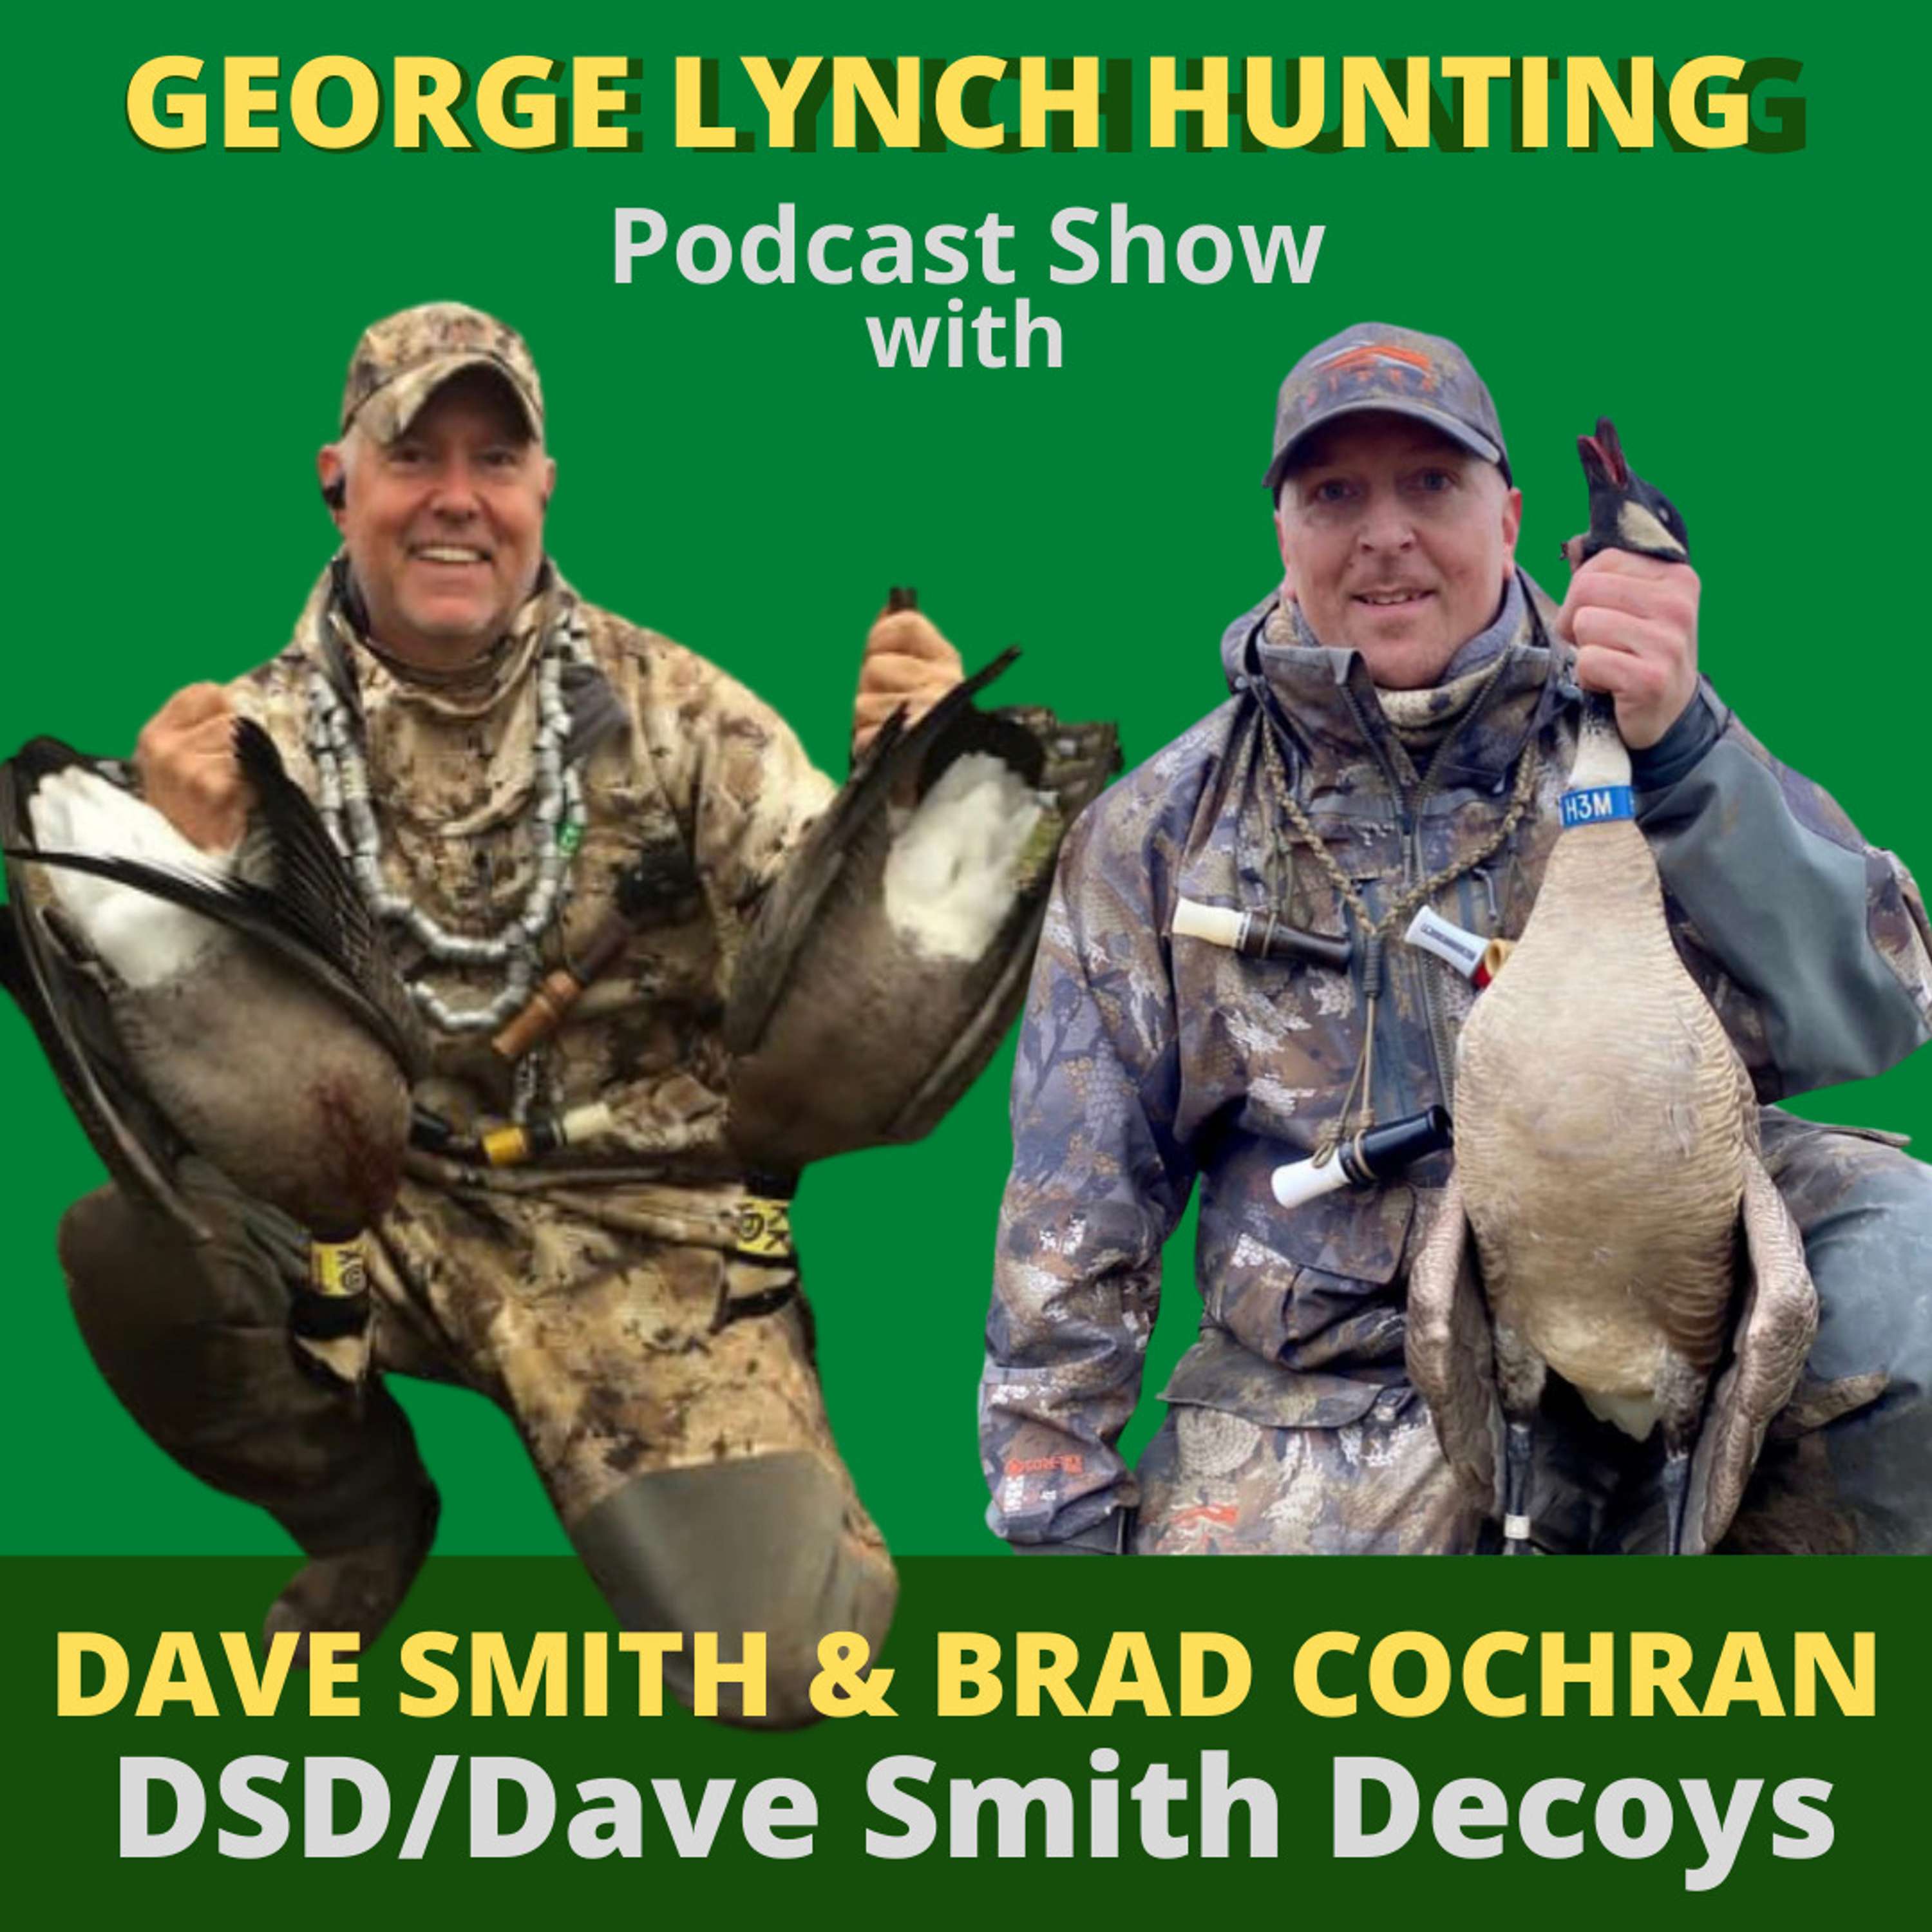 DECOY ESSENTIALS - Talk STRATEGY with 'DECOY DAVE SMITH' and co-owner BRAD COCHRAN